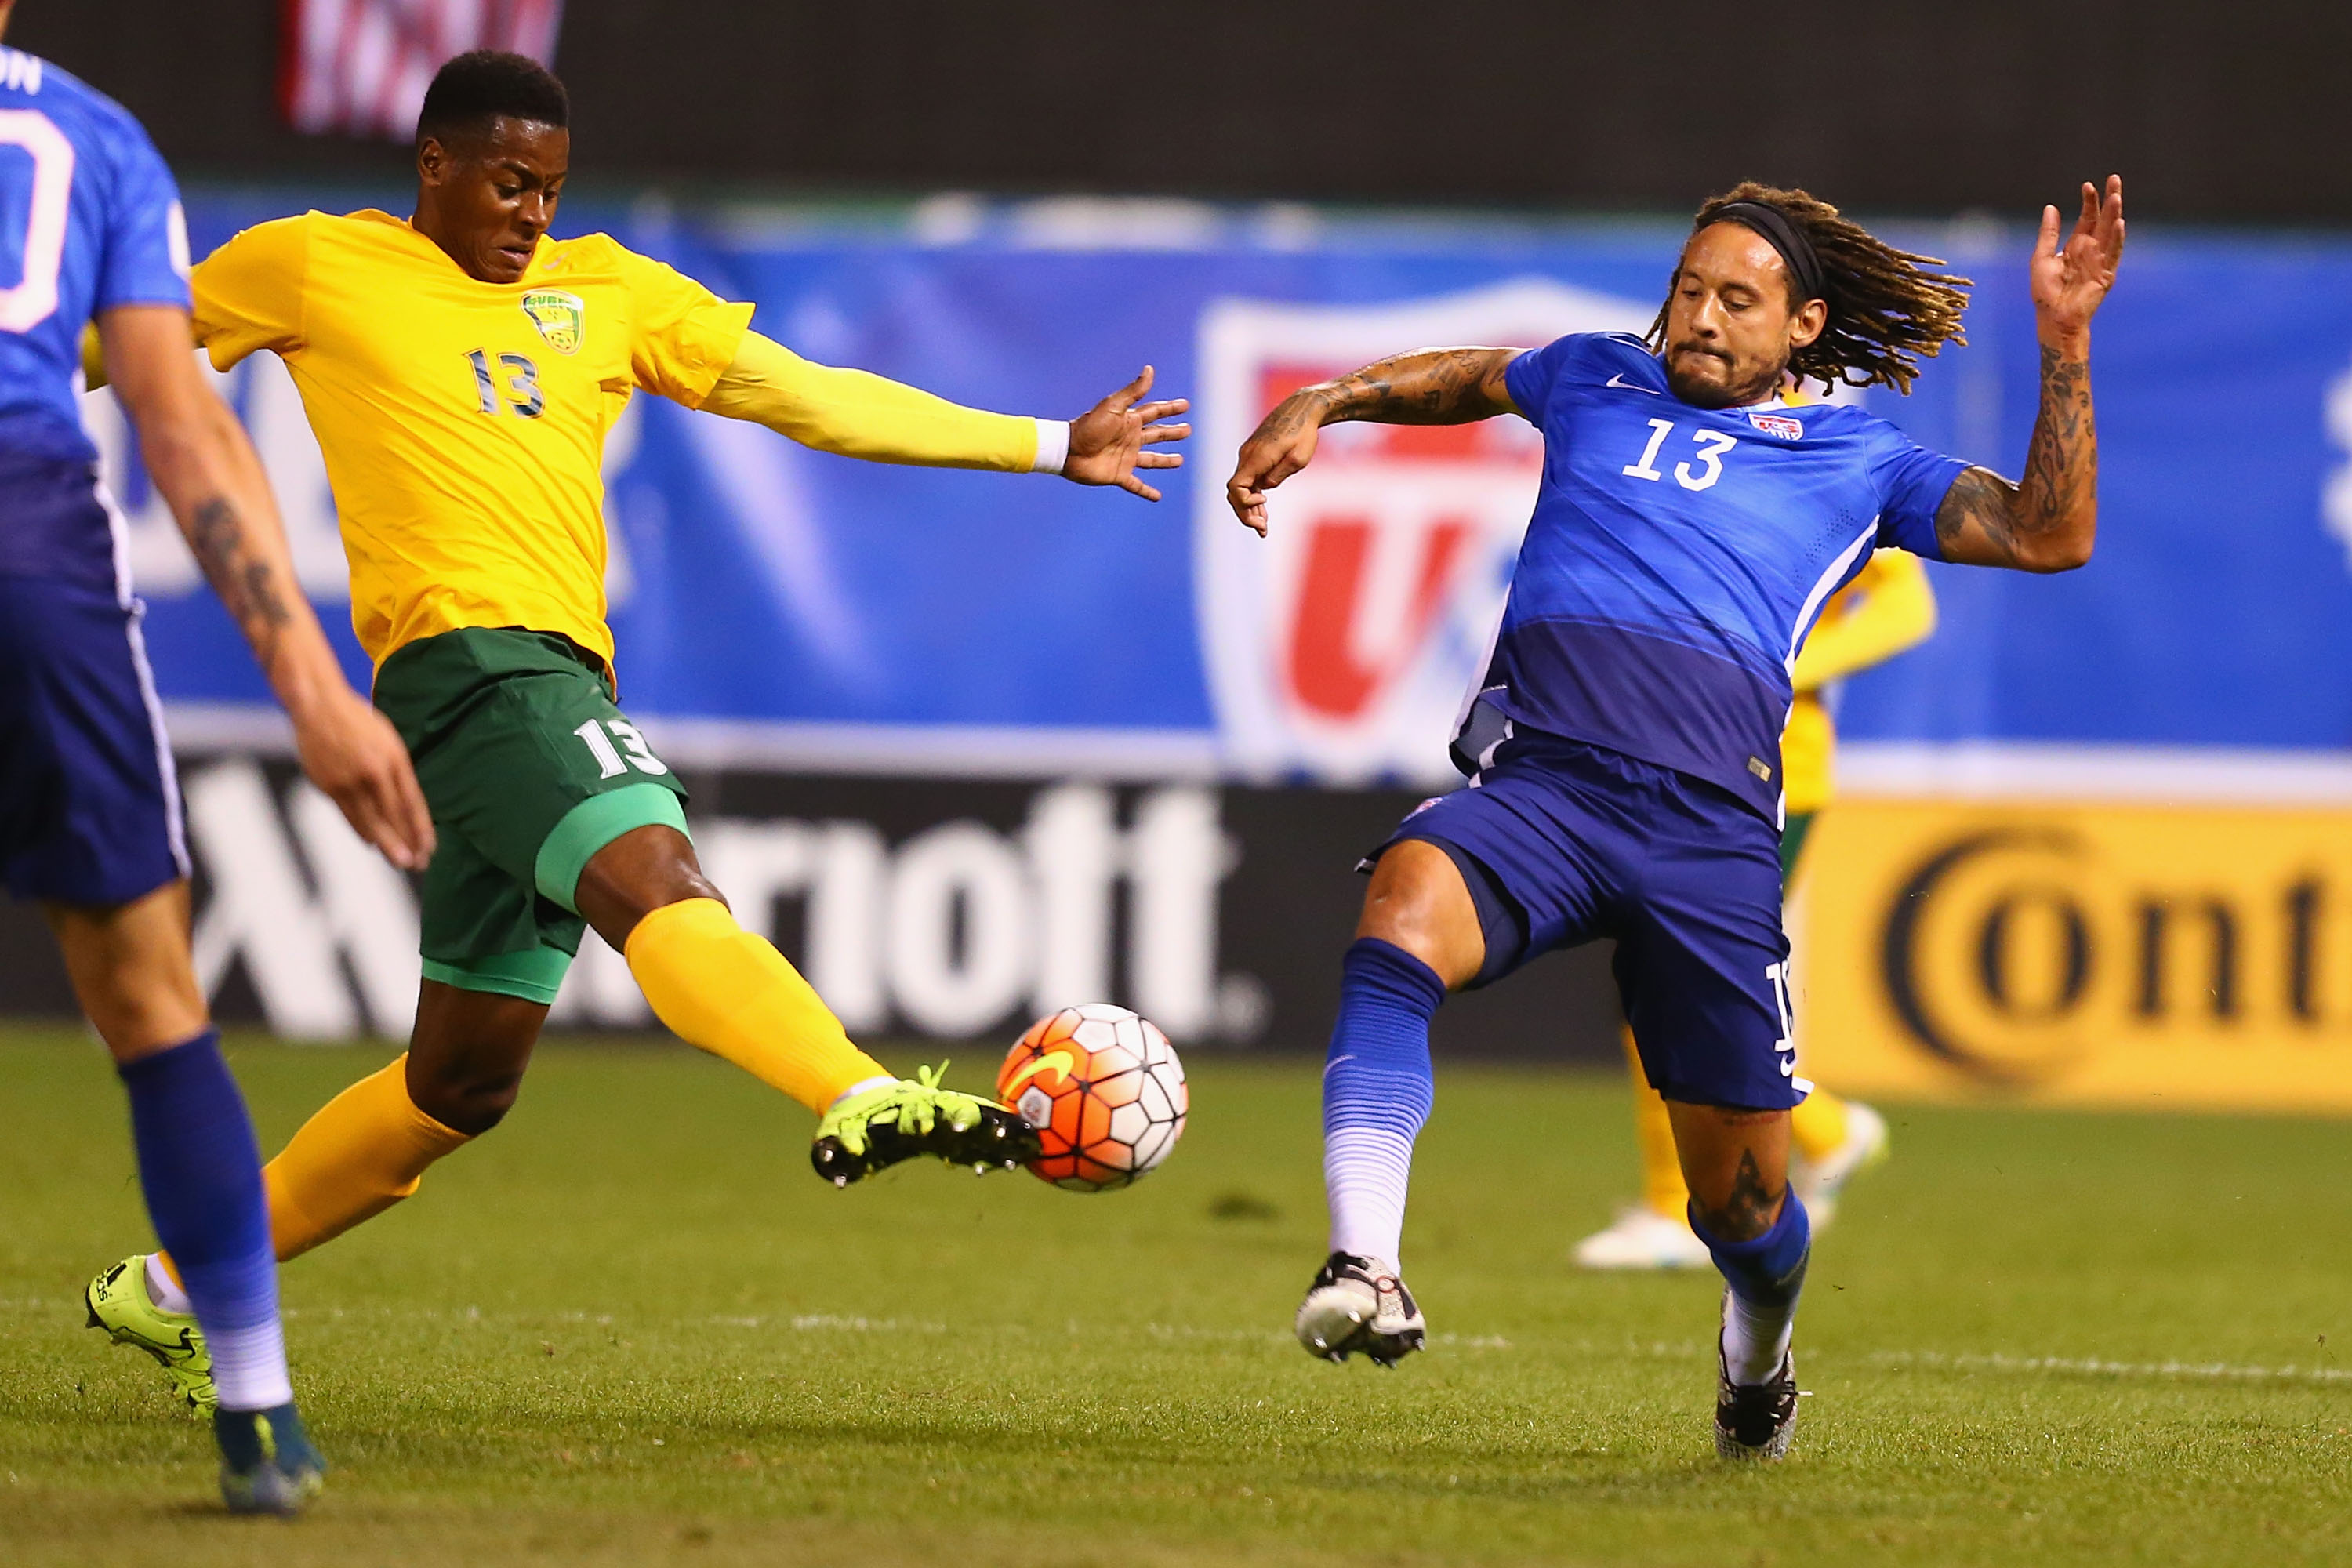 ST. LOUIS, MO - NOVEMBER 13: Gavin James #13 of St. Vincent and the Grenadines and Jermaine Jones #13 of the United States compete for a loose ball during a World Cup qualifying match at Busch Stadium on November 13, 2014 in St. Louis, Missouri. (Photo by Dilip Vishwanat/Getty Images)